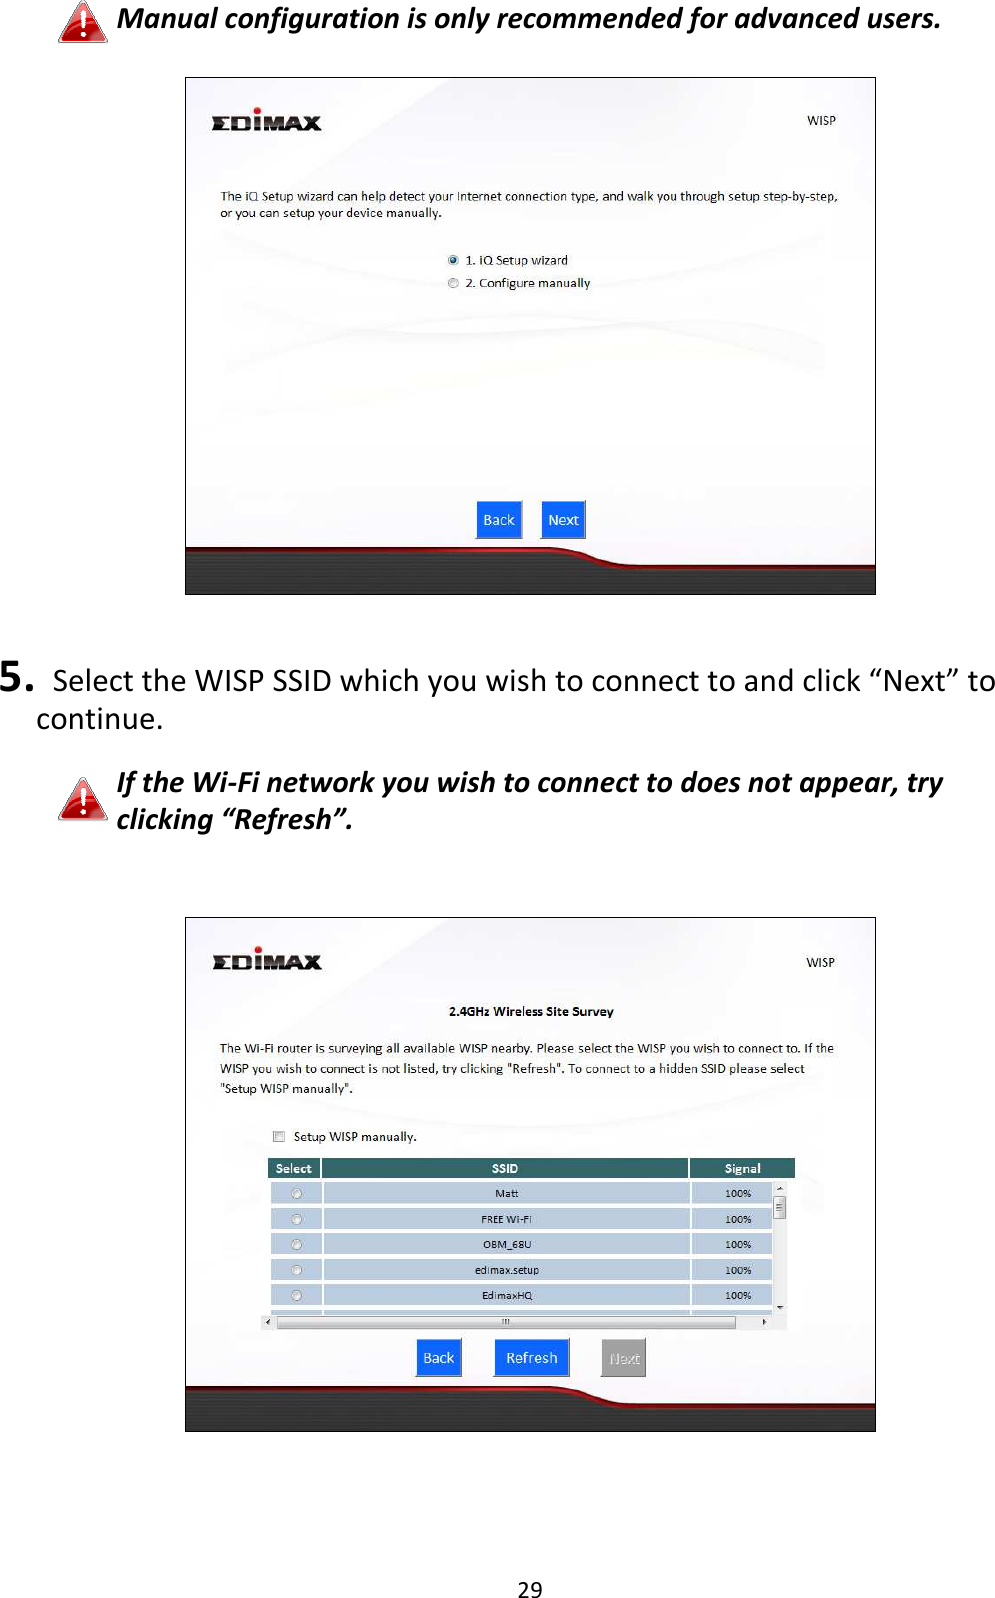 29 Manual configuration is only recommended for advanced users.     5.   Select the WISP SSID which you wish to connect to and click “Next” to continue.  If the Wi-Fi network you wish to connect to does not appear, try clicking “Refresh”.     